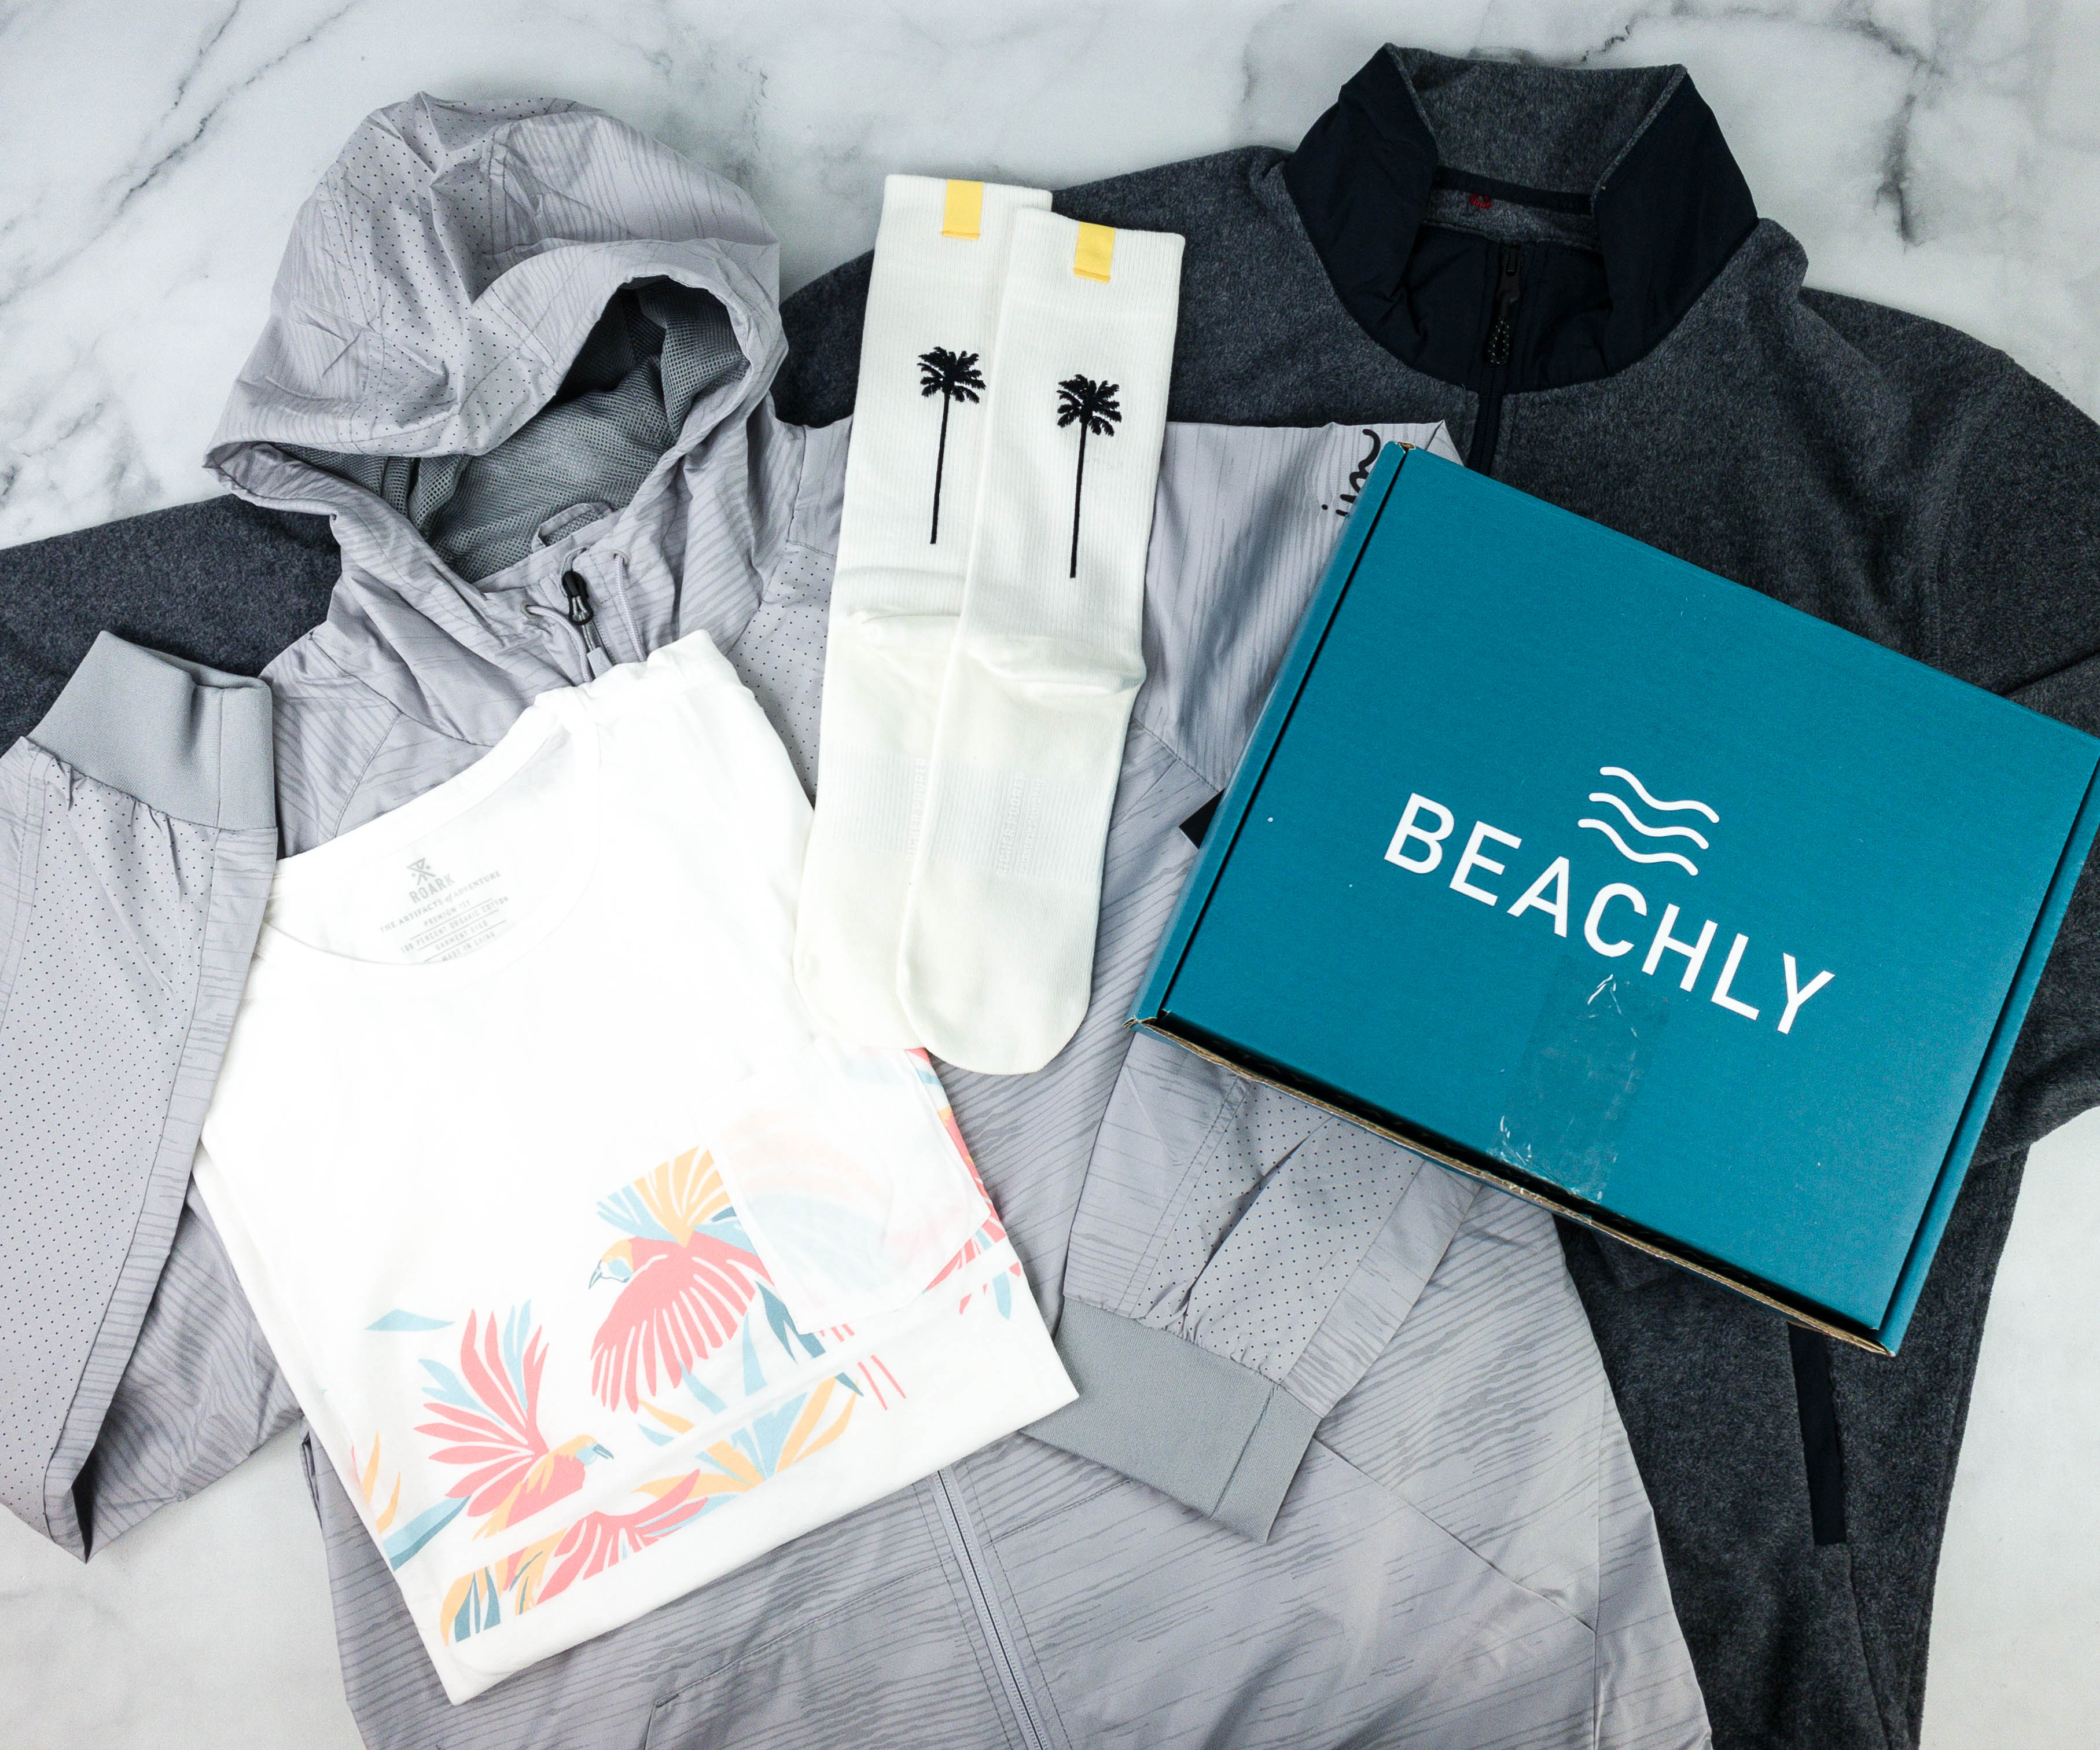 Beachly Men's Box Review: Beach-Inspired Apparel, Accessories